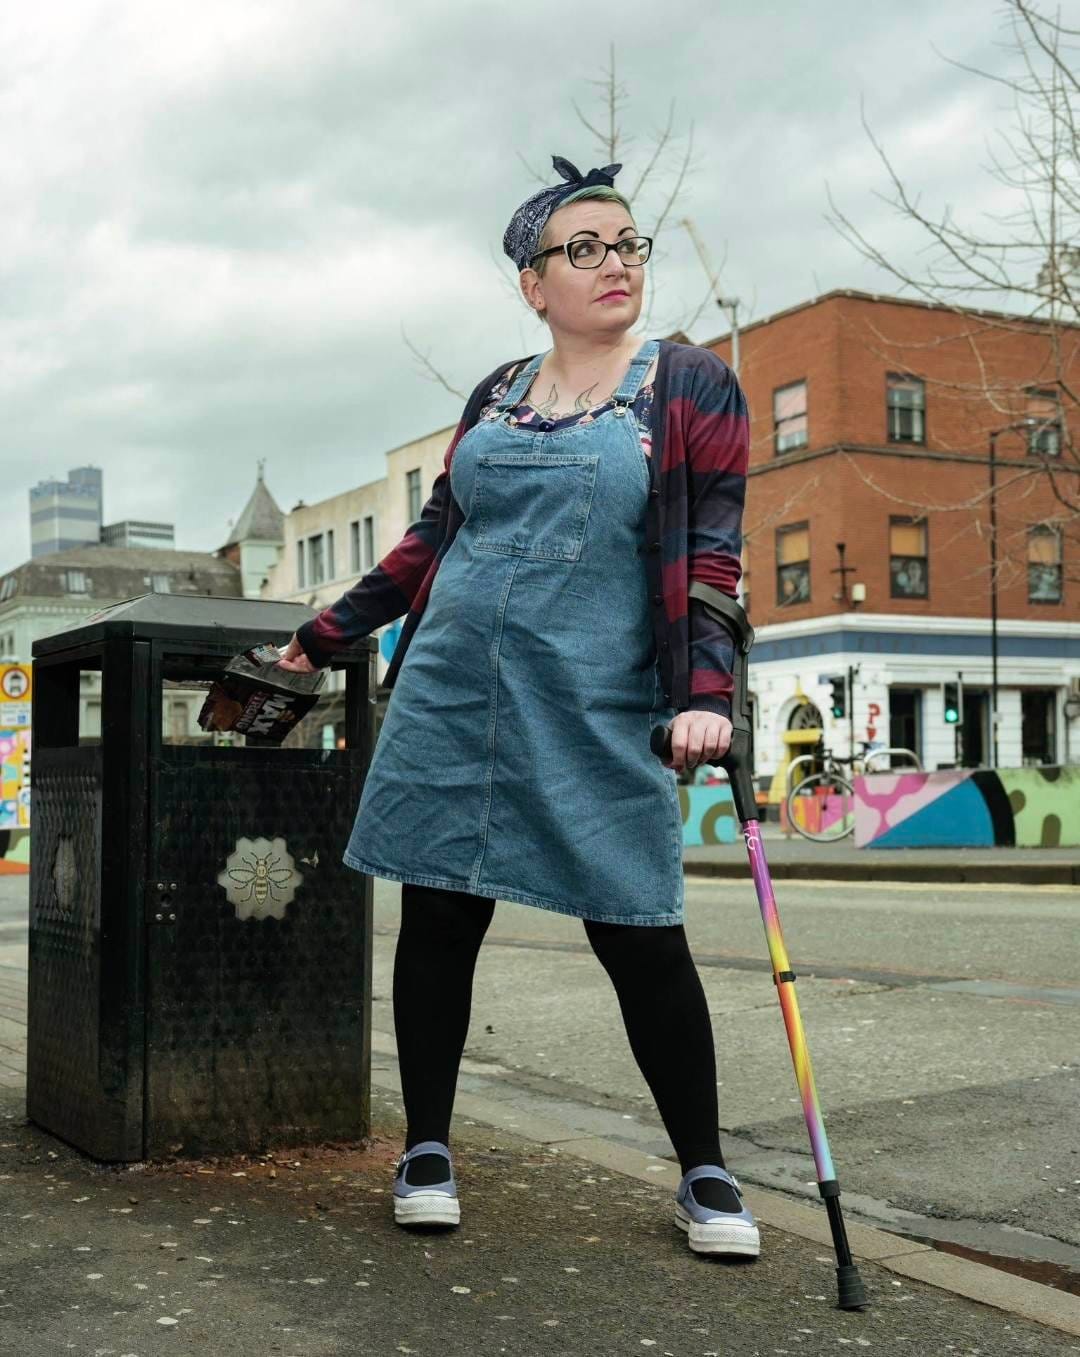 Gemma, a white woman with glasses, and blue hair which she has wrapped in a blue headscarf, stands in the street next to a bin. She is using a walking stick with one hand, and reaching behind her with the other to out something in the bin.